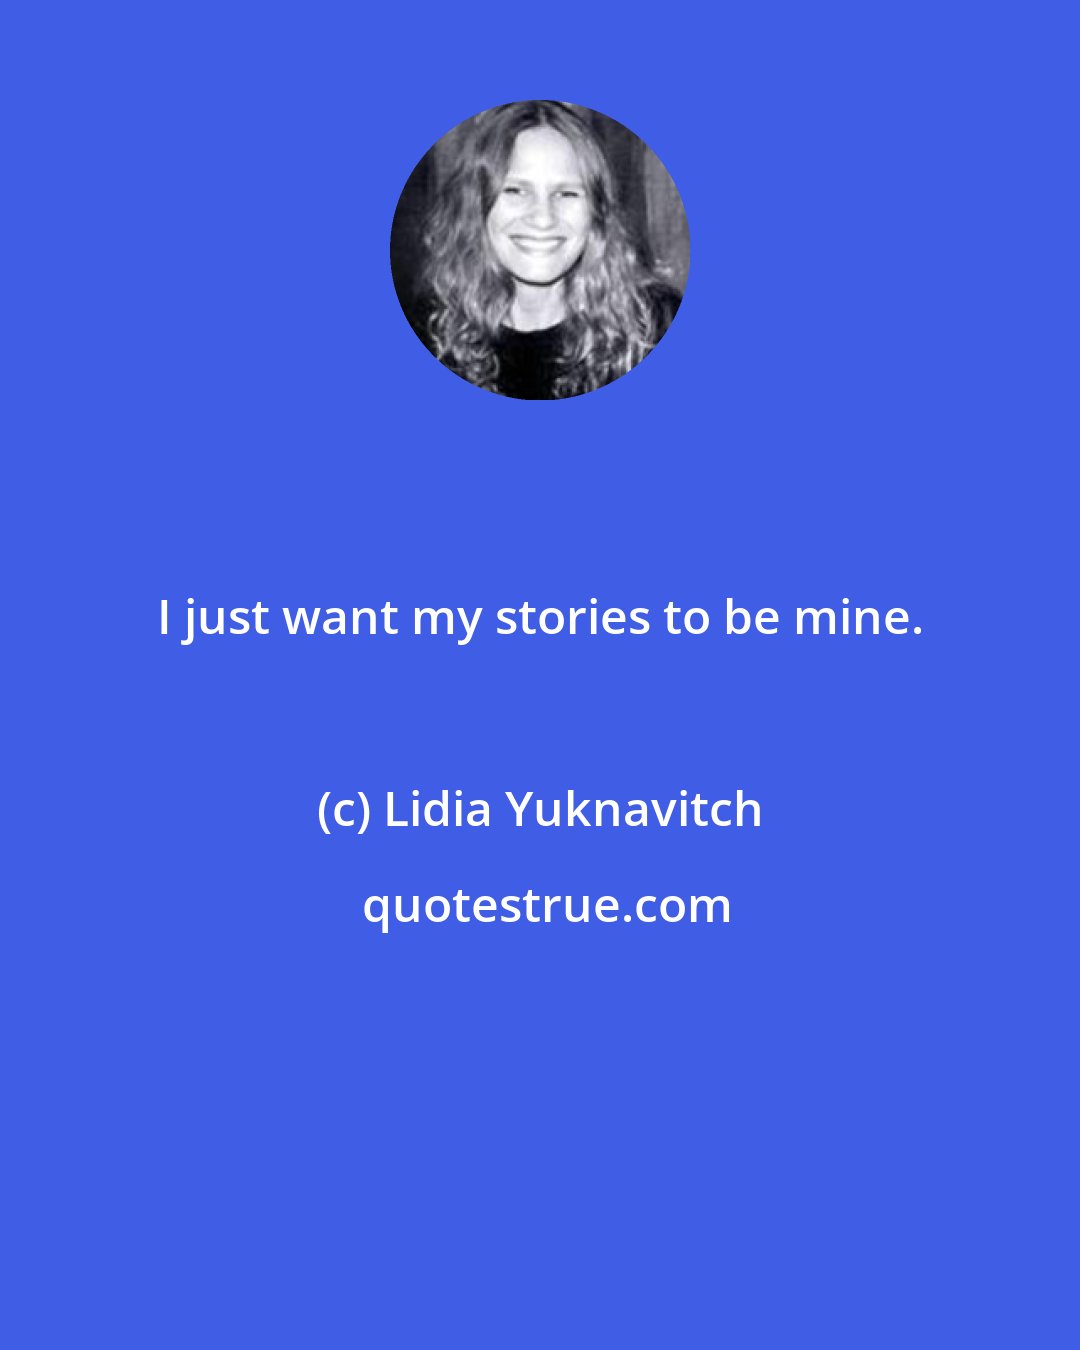 Lidia Yuknavitch: I just want my stories to be mine.